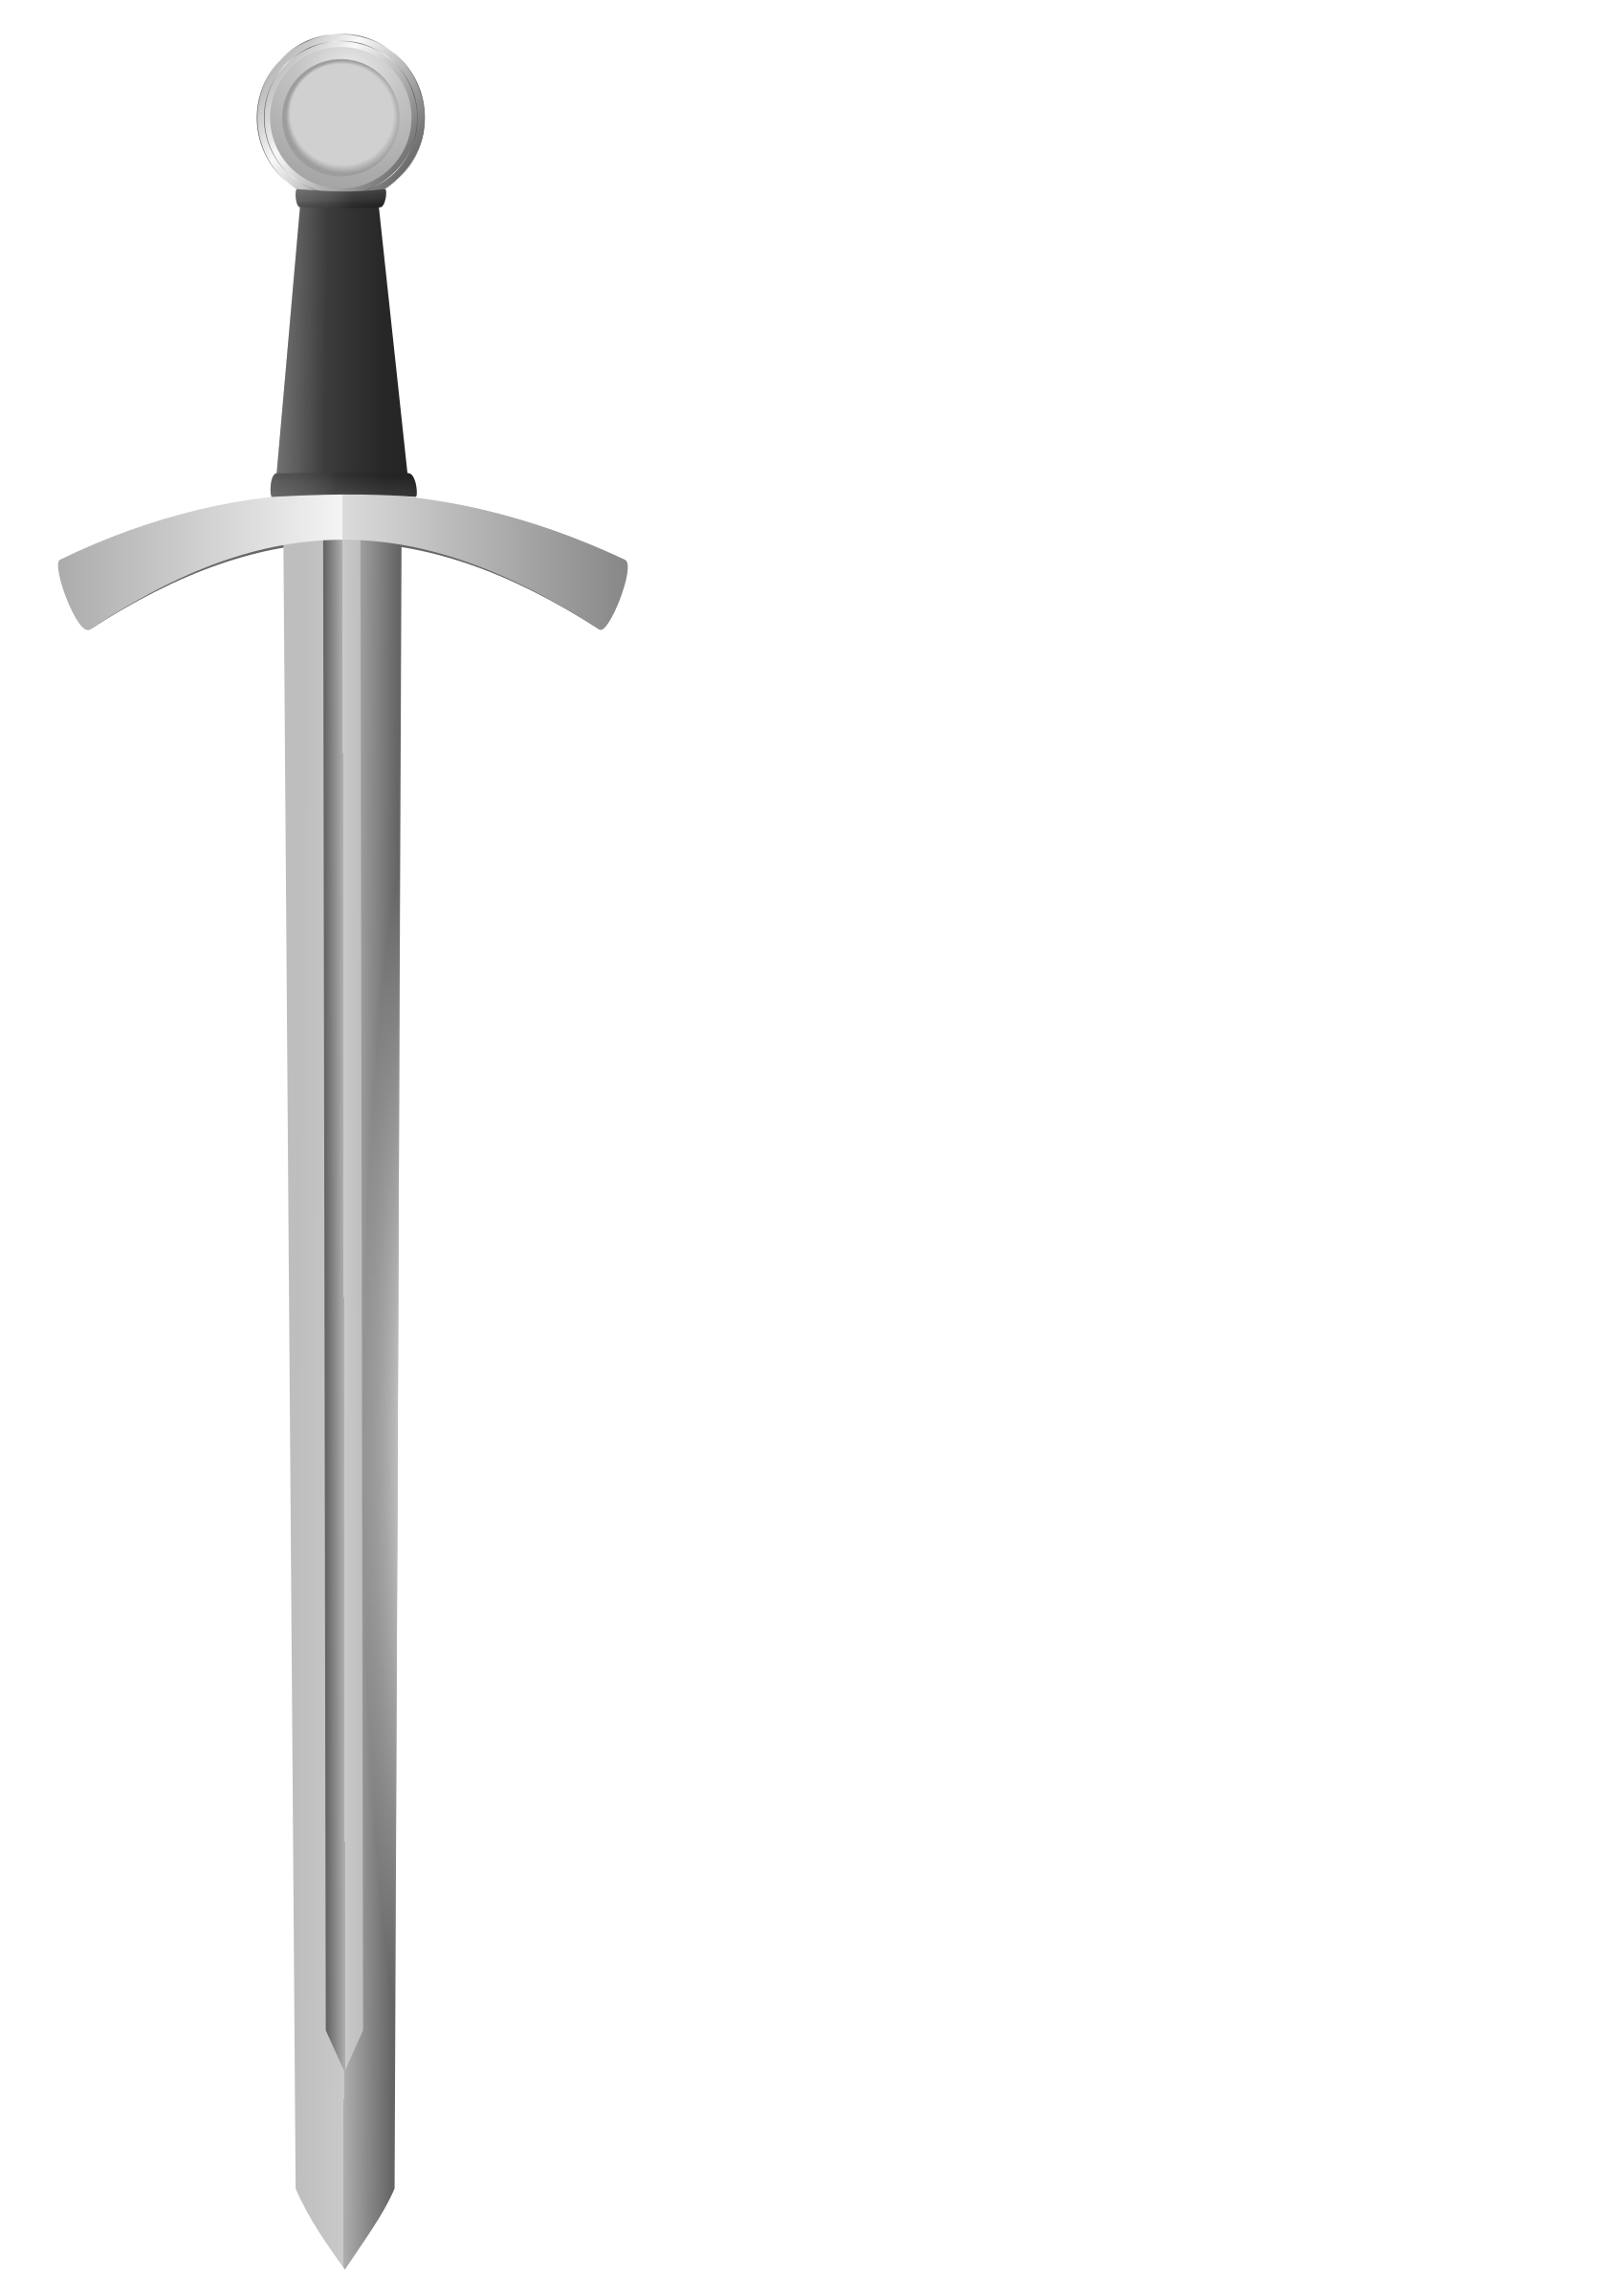 Classic Medieval Sword By Gribba